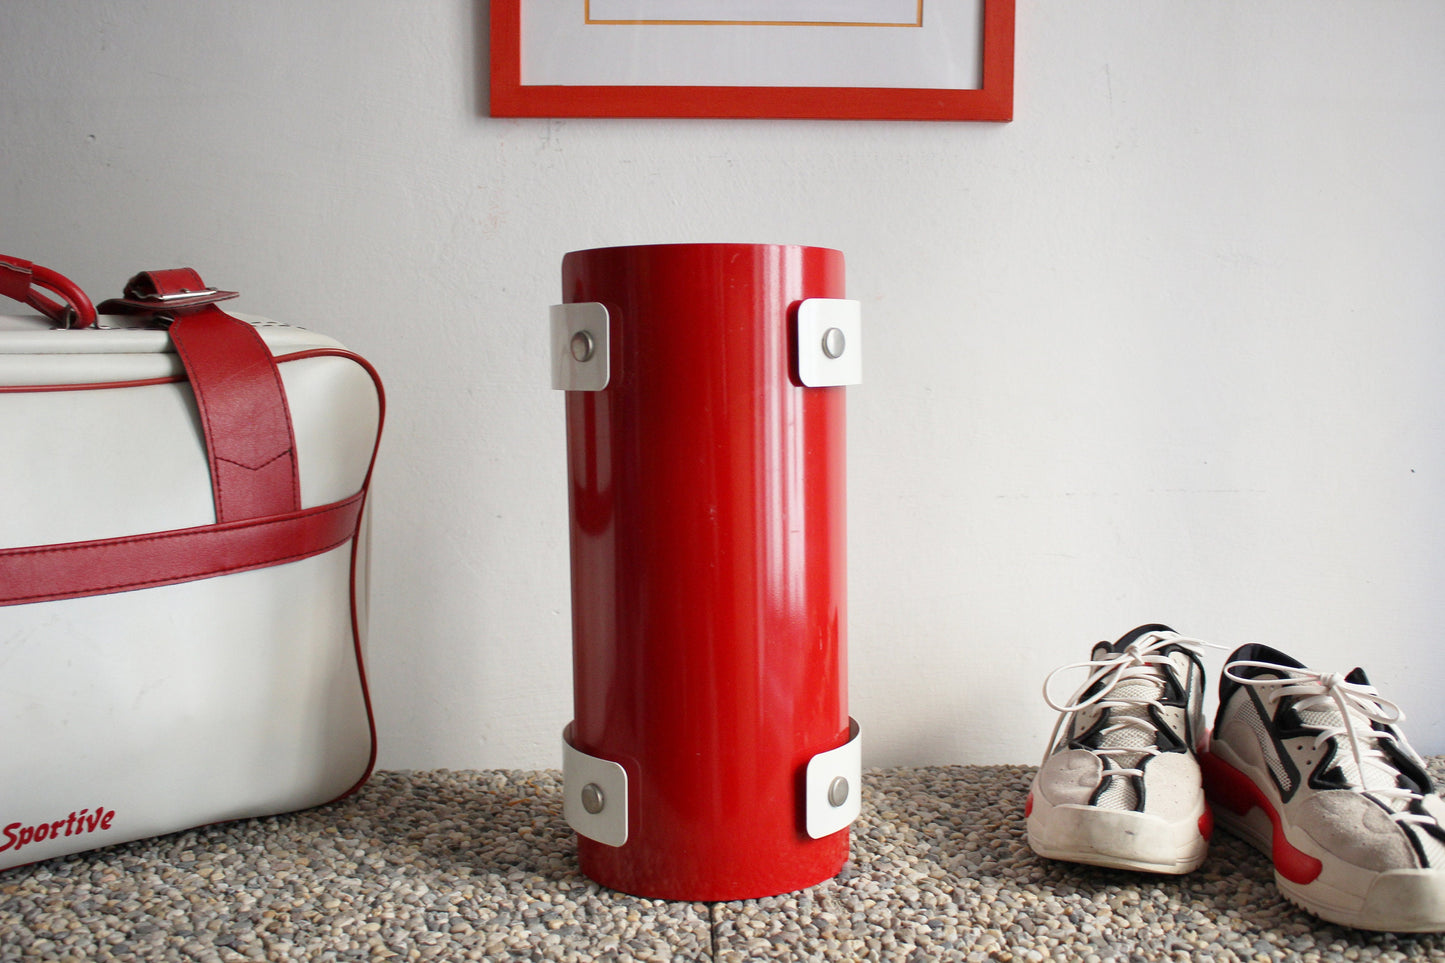 Vintage red and white Space age umbrella stand, 50s-60s mid-century design